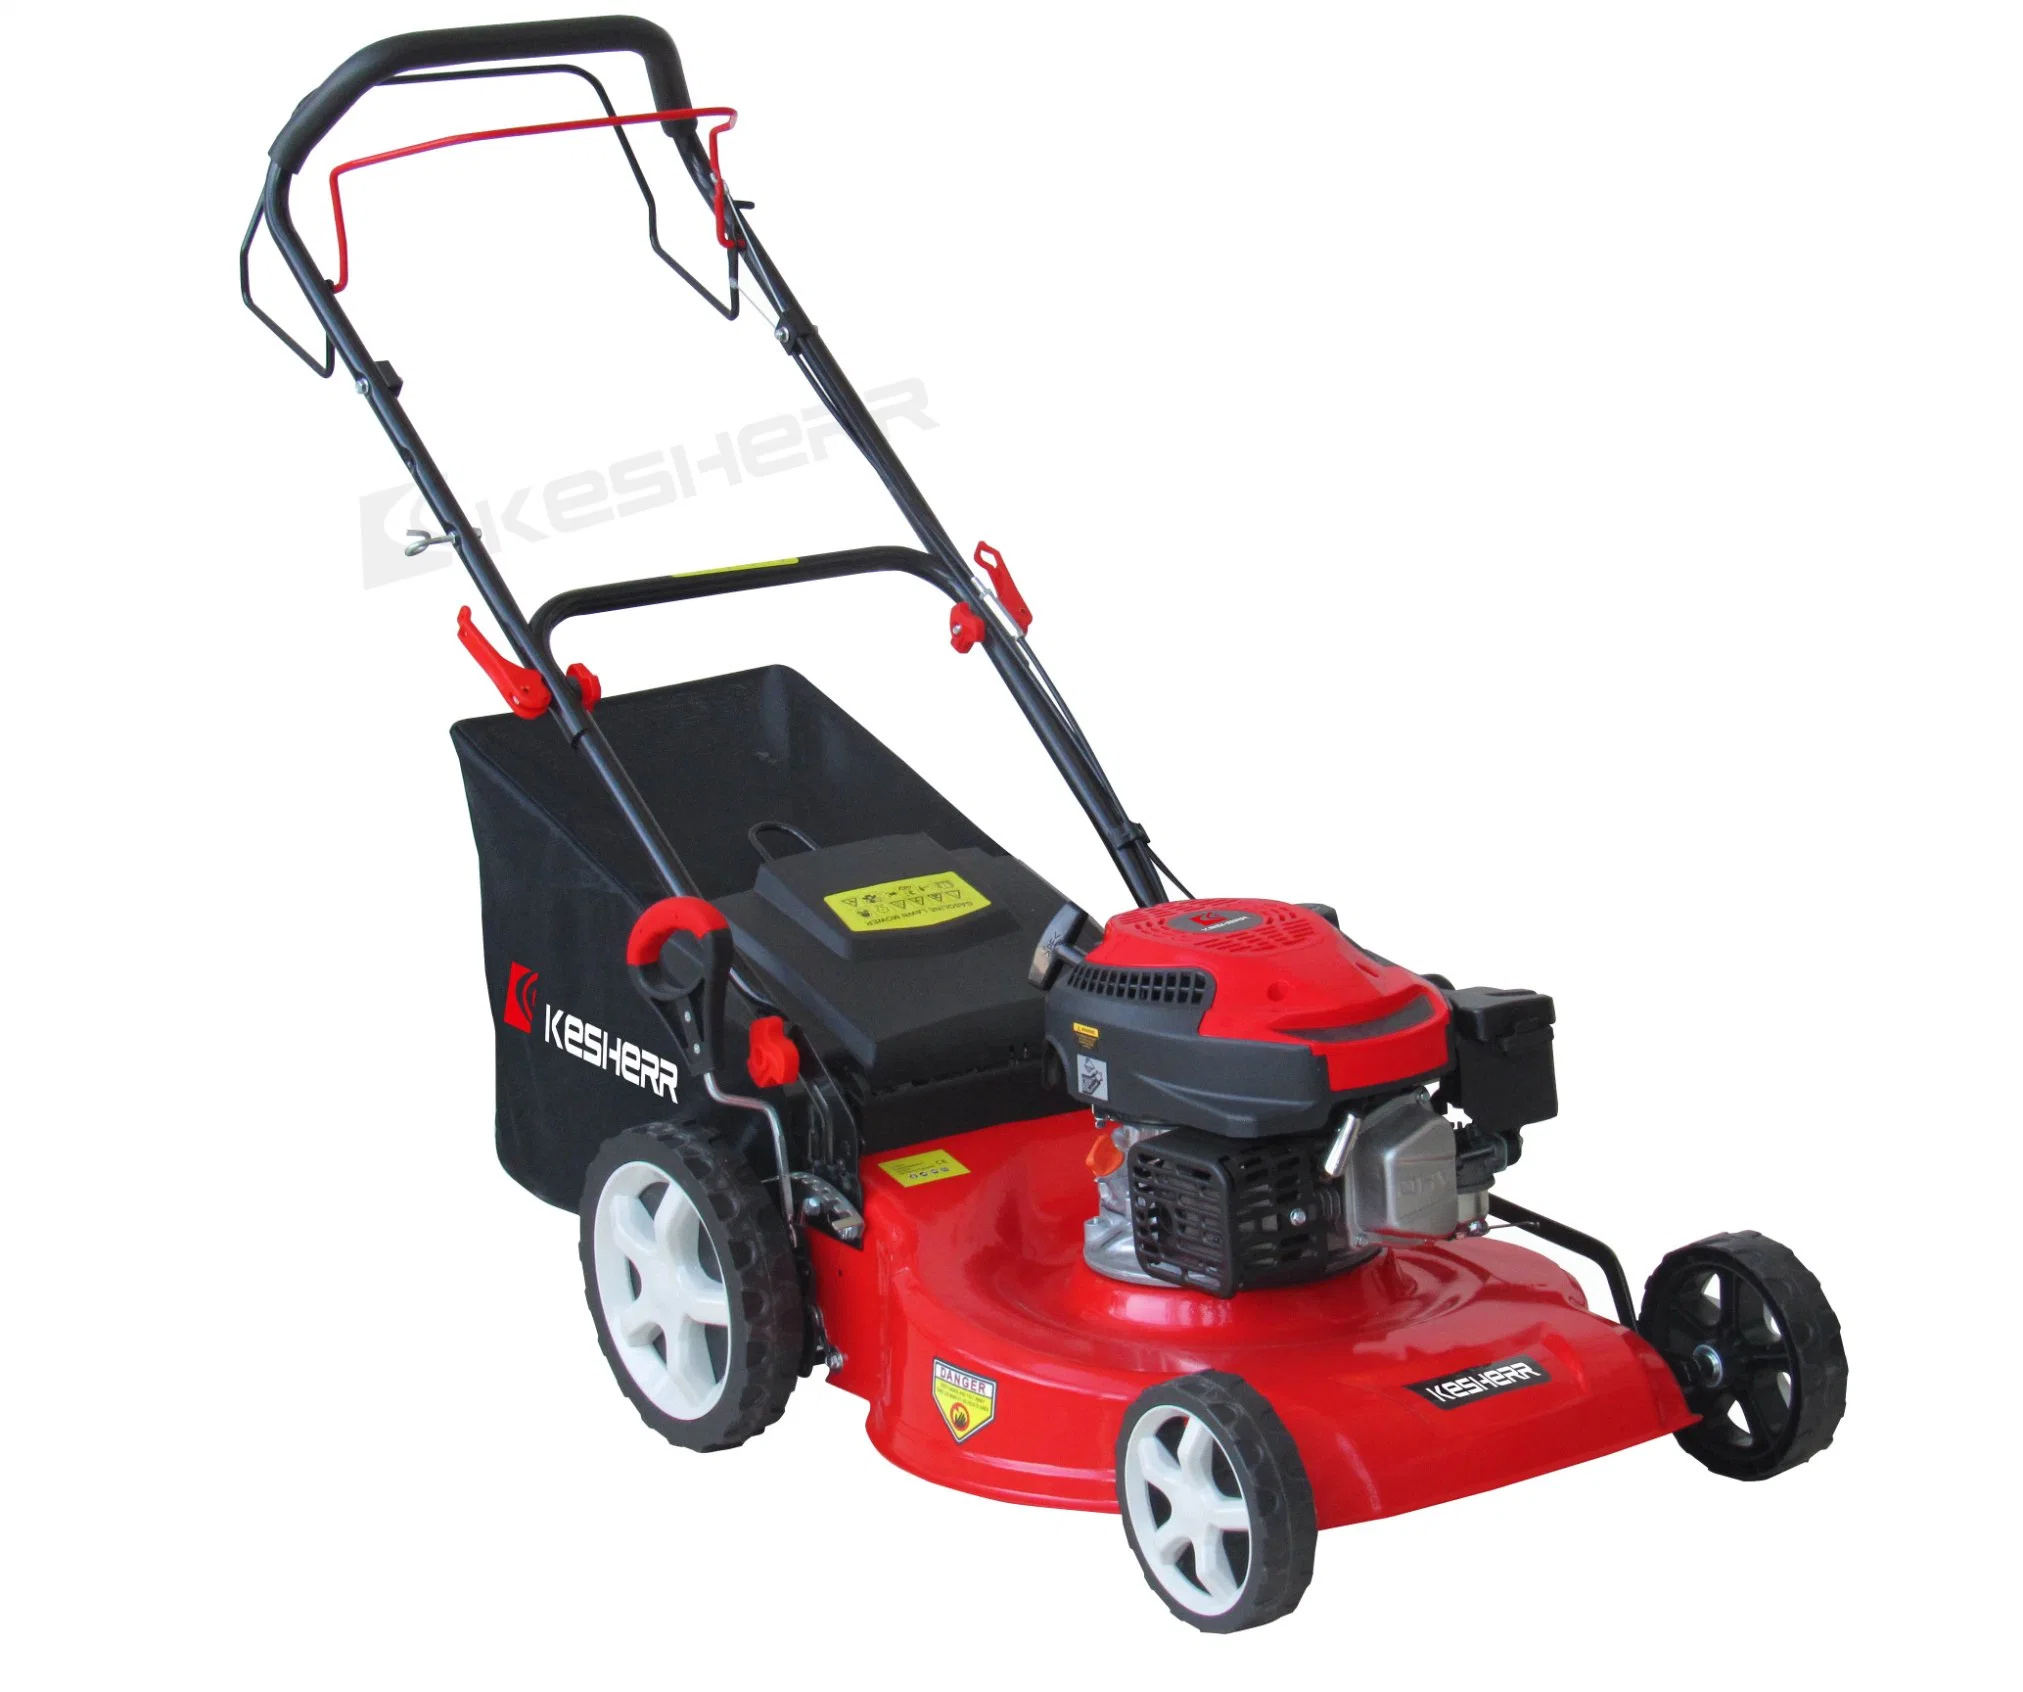 Agricultural Machinery Cutting Width Self-Propelled Lawn Mower